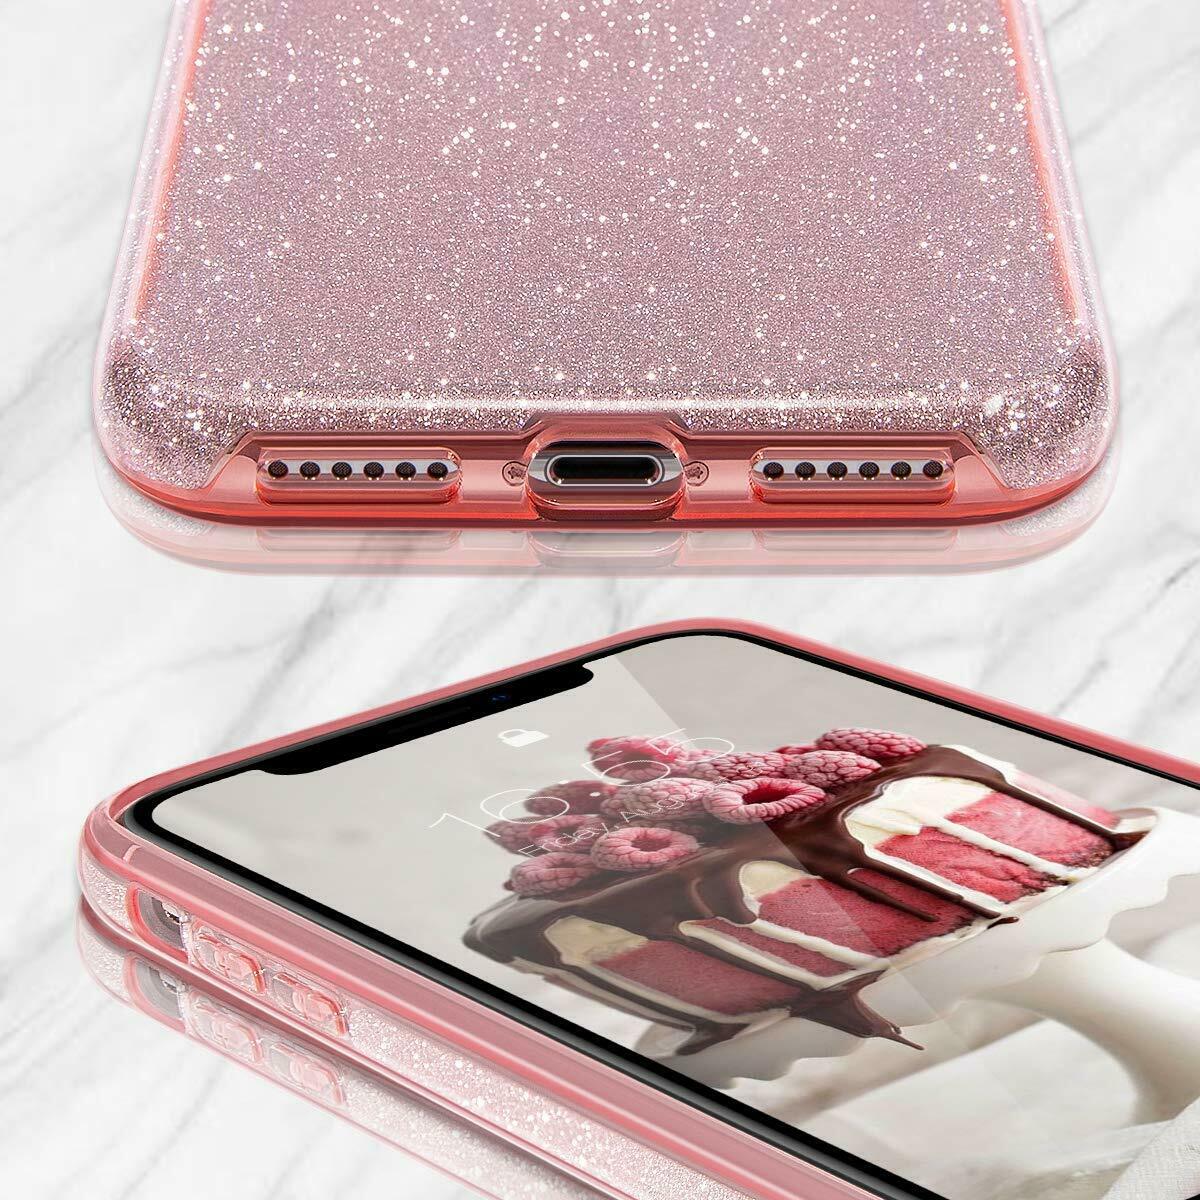 Samsung Galaxy S Series Ultra Slim 3 Layer Hybrid Back Cover Sparkle Shinning Protective Bumper Bling Glitter Case